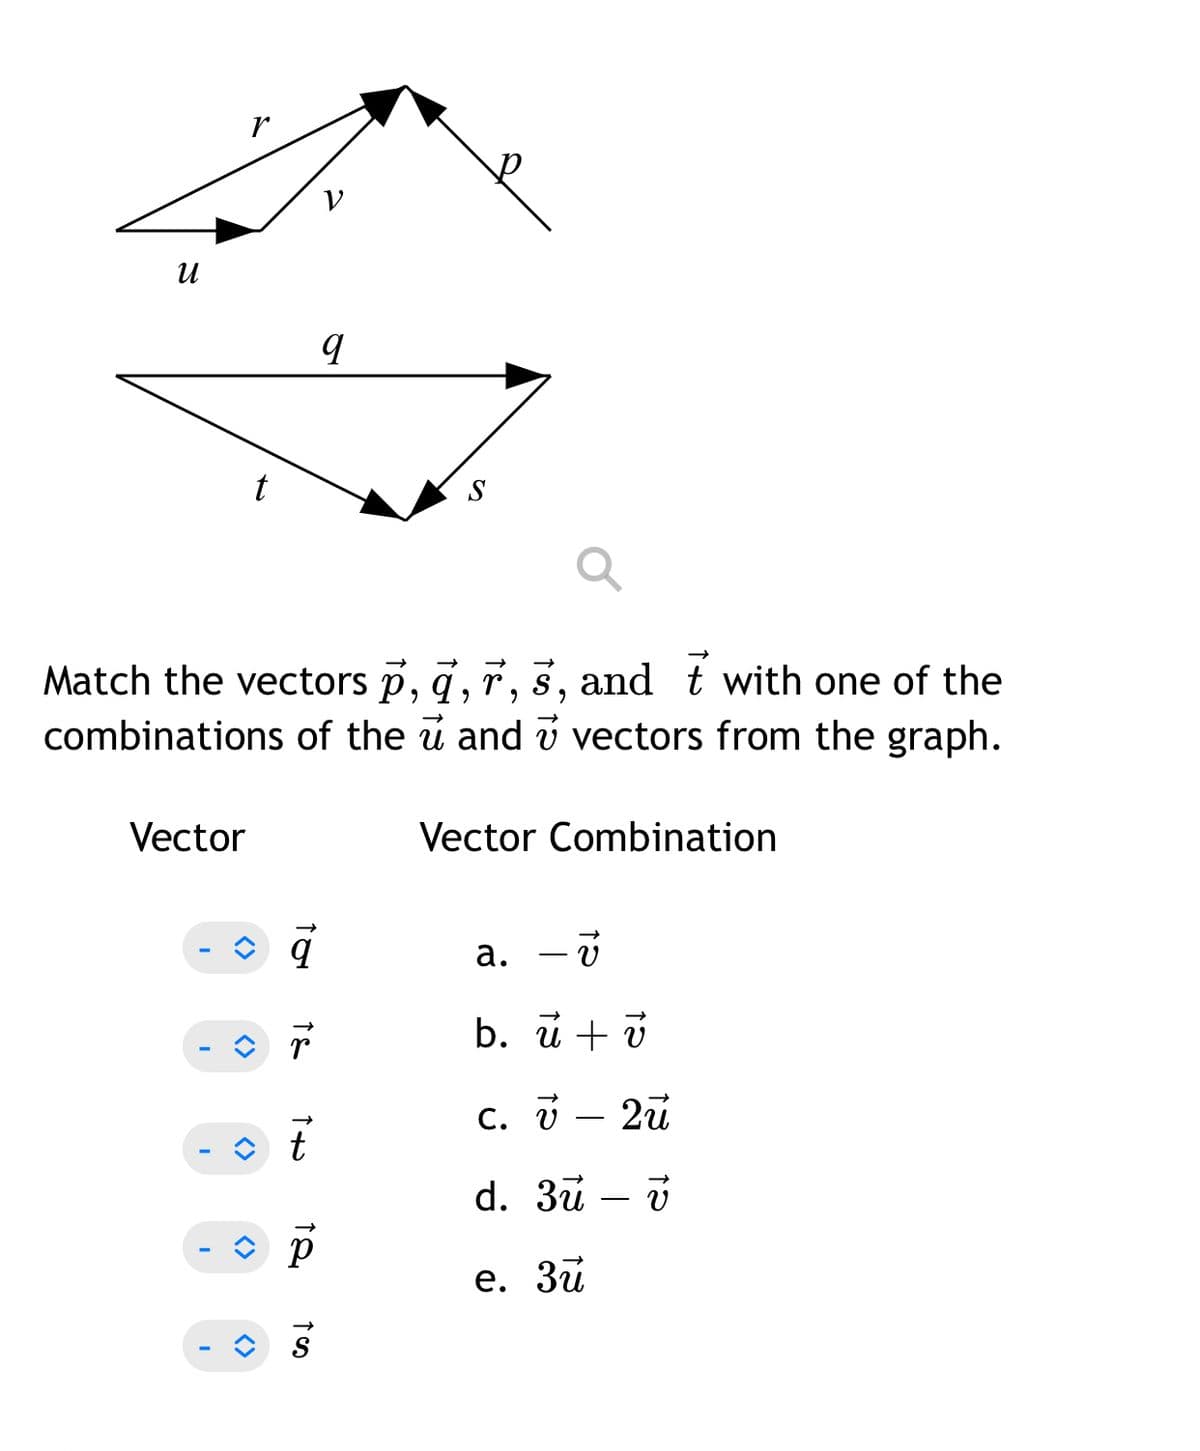 и
t
Match the vectors p, q, r, s, and t with one of the
combinations of the u and v vectors from the graph.
Vector
Vector Combination
а. —
b. u + v
с. у — 2а
t
d. 3ū – v
е. Зи
<>
<>
